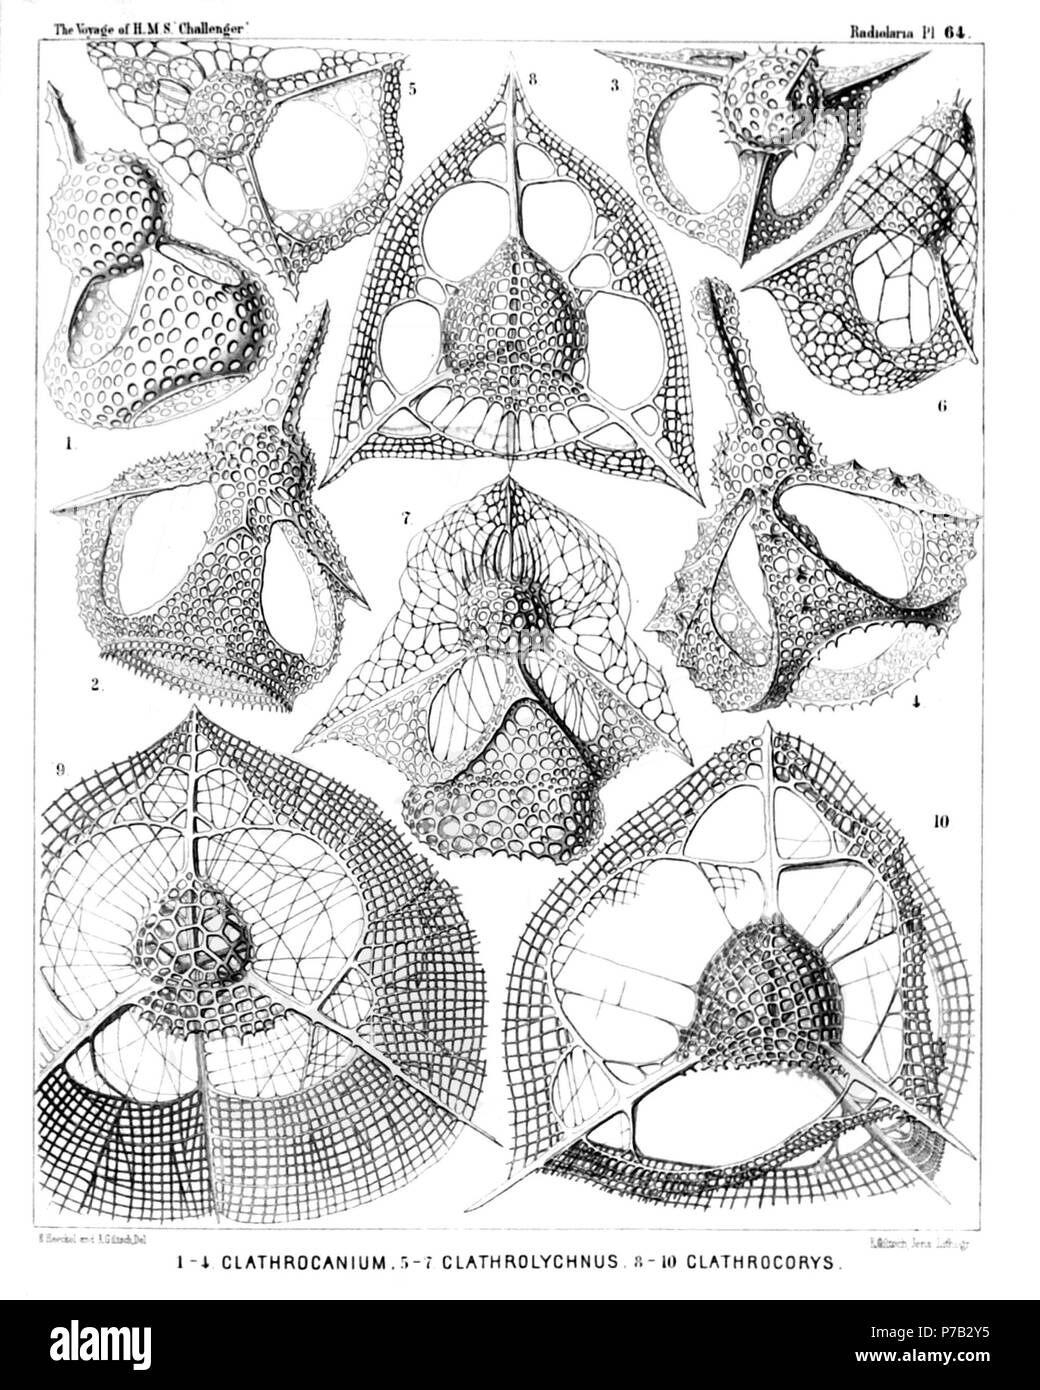 English: Illustration from Report on the Radiolaria collected by H.M.S. Challenger during the years 1873-1876. Part III. Original description follows:  Plate 64. Tripocyrtida et Podocyrtida.  Diam.  Fig. 1. Clathrocanium sphærocephalum, n. sp., × 600  Fig. 2. Clathrocanium diadema, n. sp., × 600  Fig. 3. Clathrocanium triomma, n. sp., × 600  Fig. 4. Clathrocanium reginæ, n. sp., × 600  Fig. 5. Clathrolychnus araneosus, n. sp., × 600  Fig. 6. Clathrolychnus periplectus, n. sp., × 600  Fig. 7. Pteropilium clathrocanium, n. sp., × 400  Fig. 8. Clathrocorys murrayi, n. sp., × 600  Fig. 9. Clathroc Stock Photo